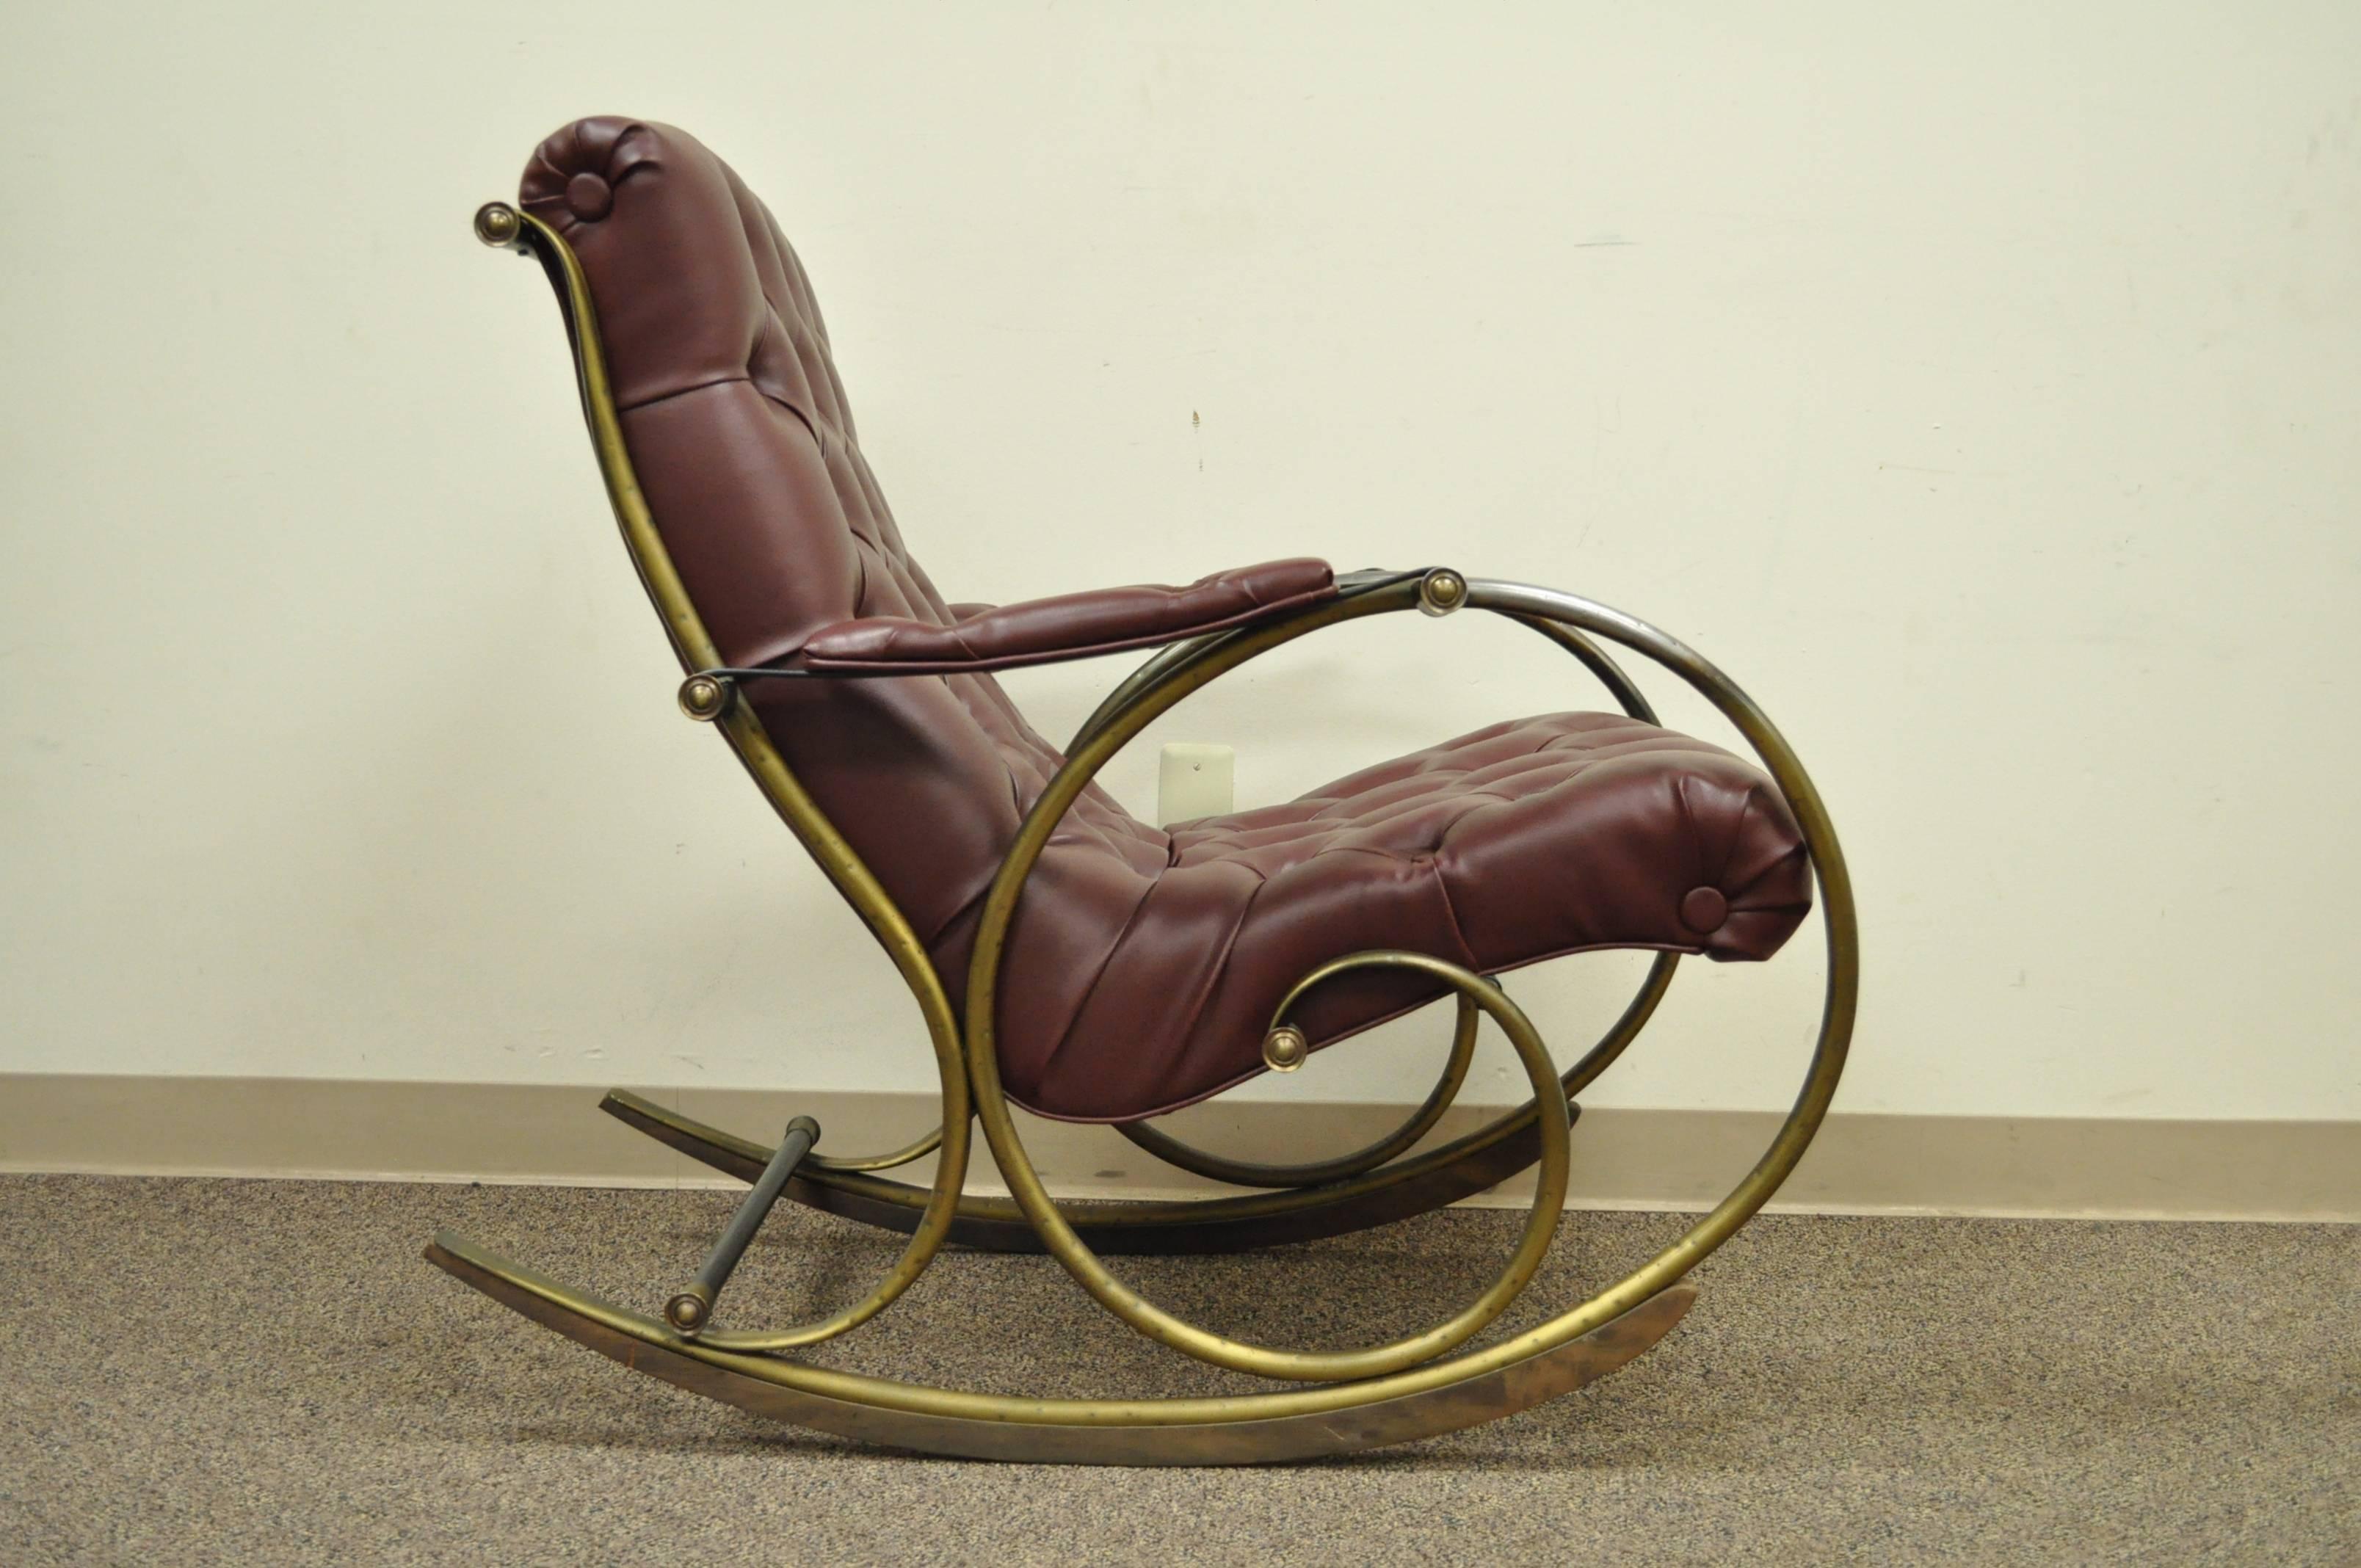 Lovely Mid-Century rocking chair designed by Lee Woodard. The chair frame is bent and hammered tubular brass, with wooden rockers. Upholstered in a tufted oxblood vinyl.